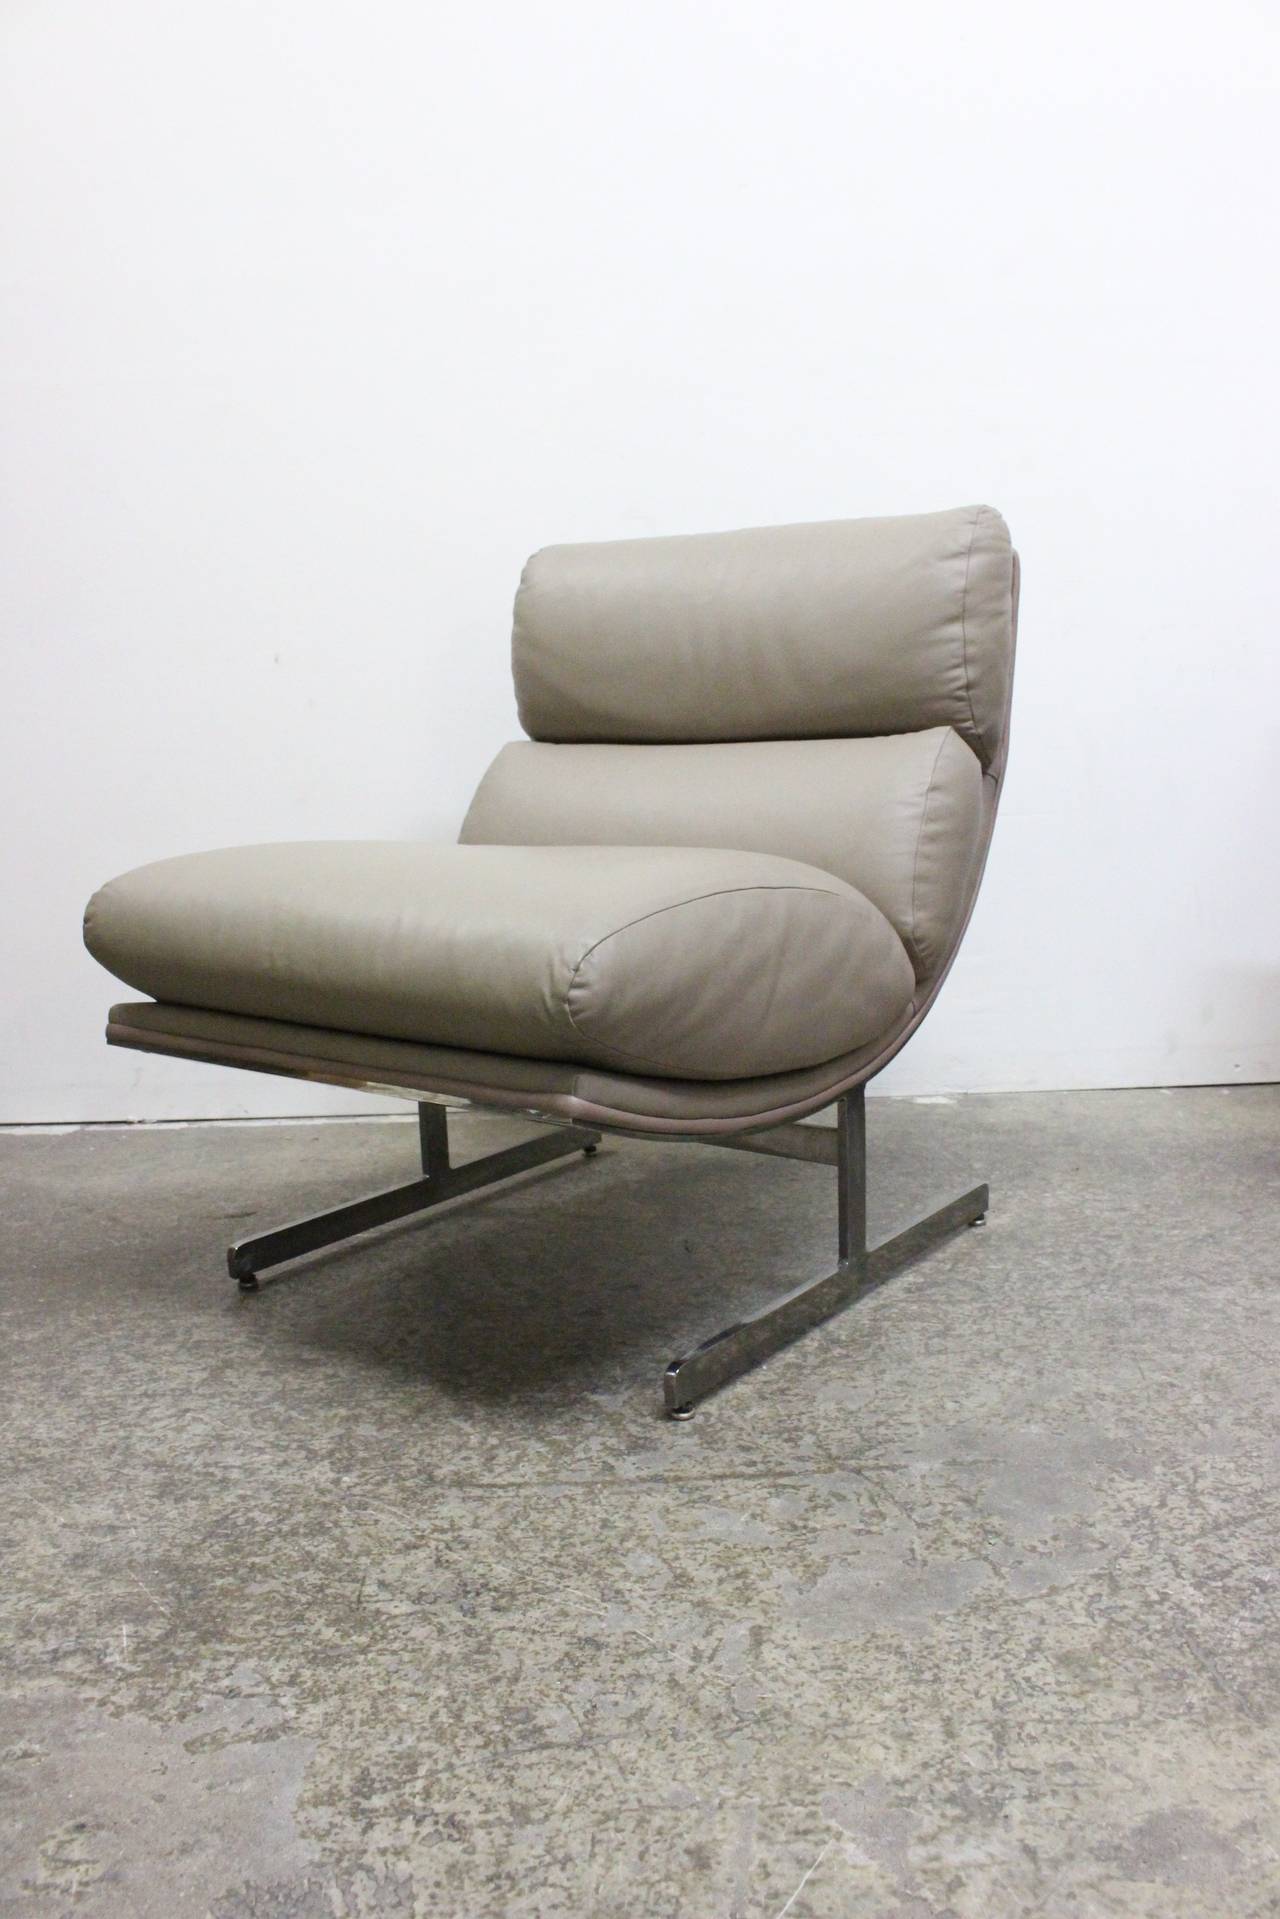 Pair of leather chairs by Kipp Stewart for Directional.